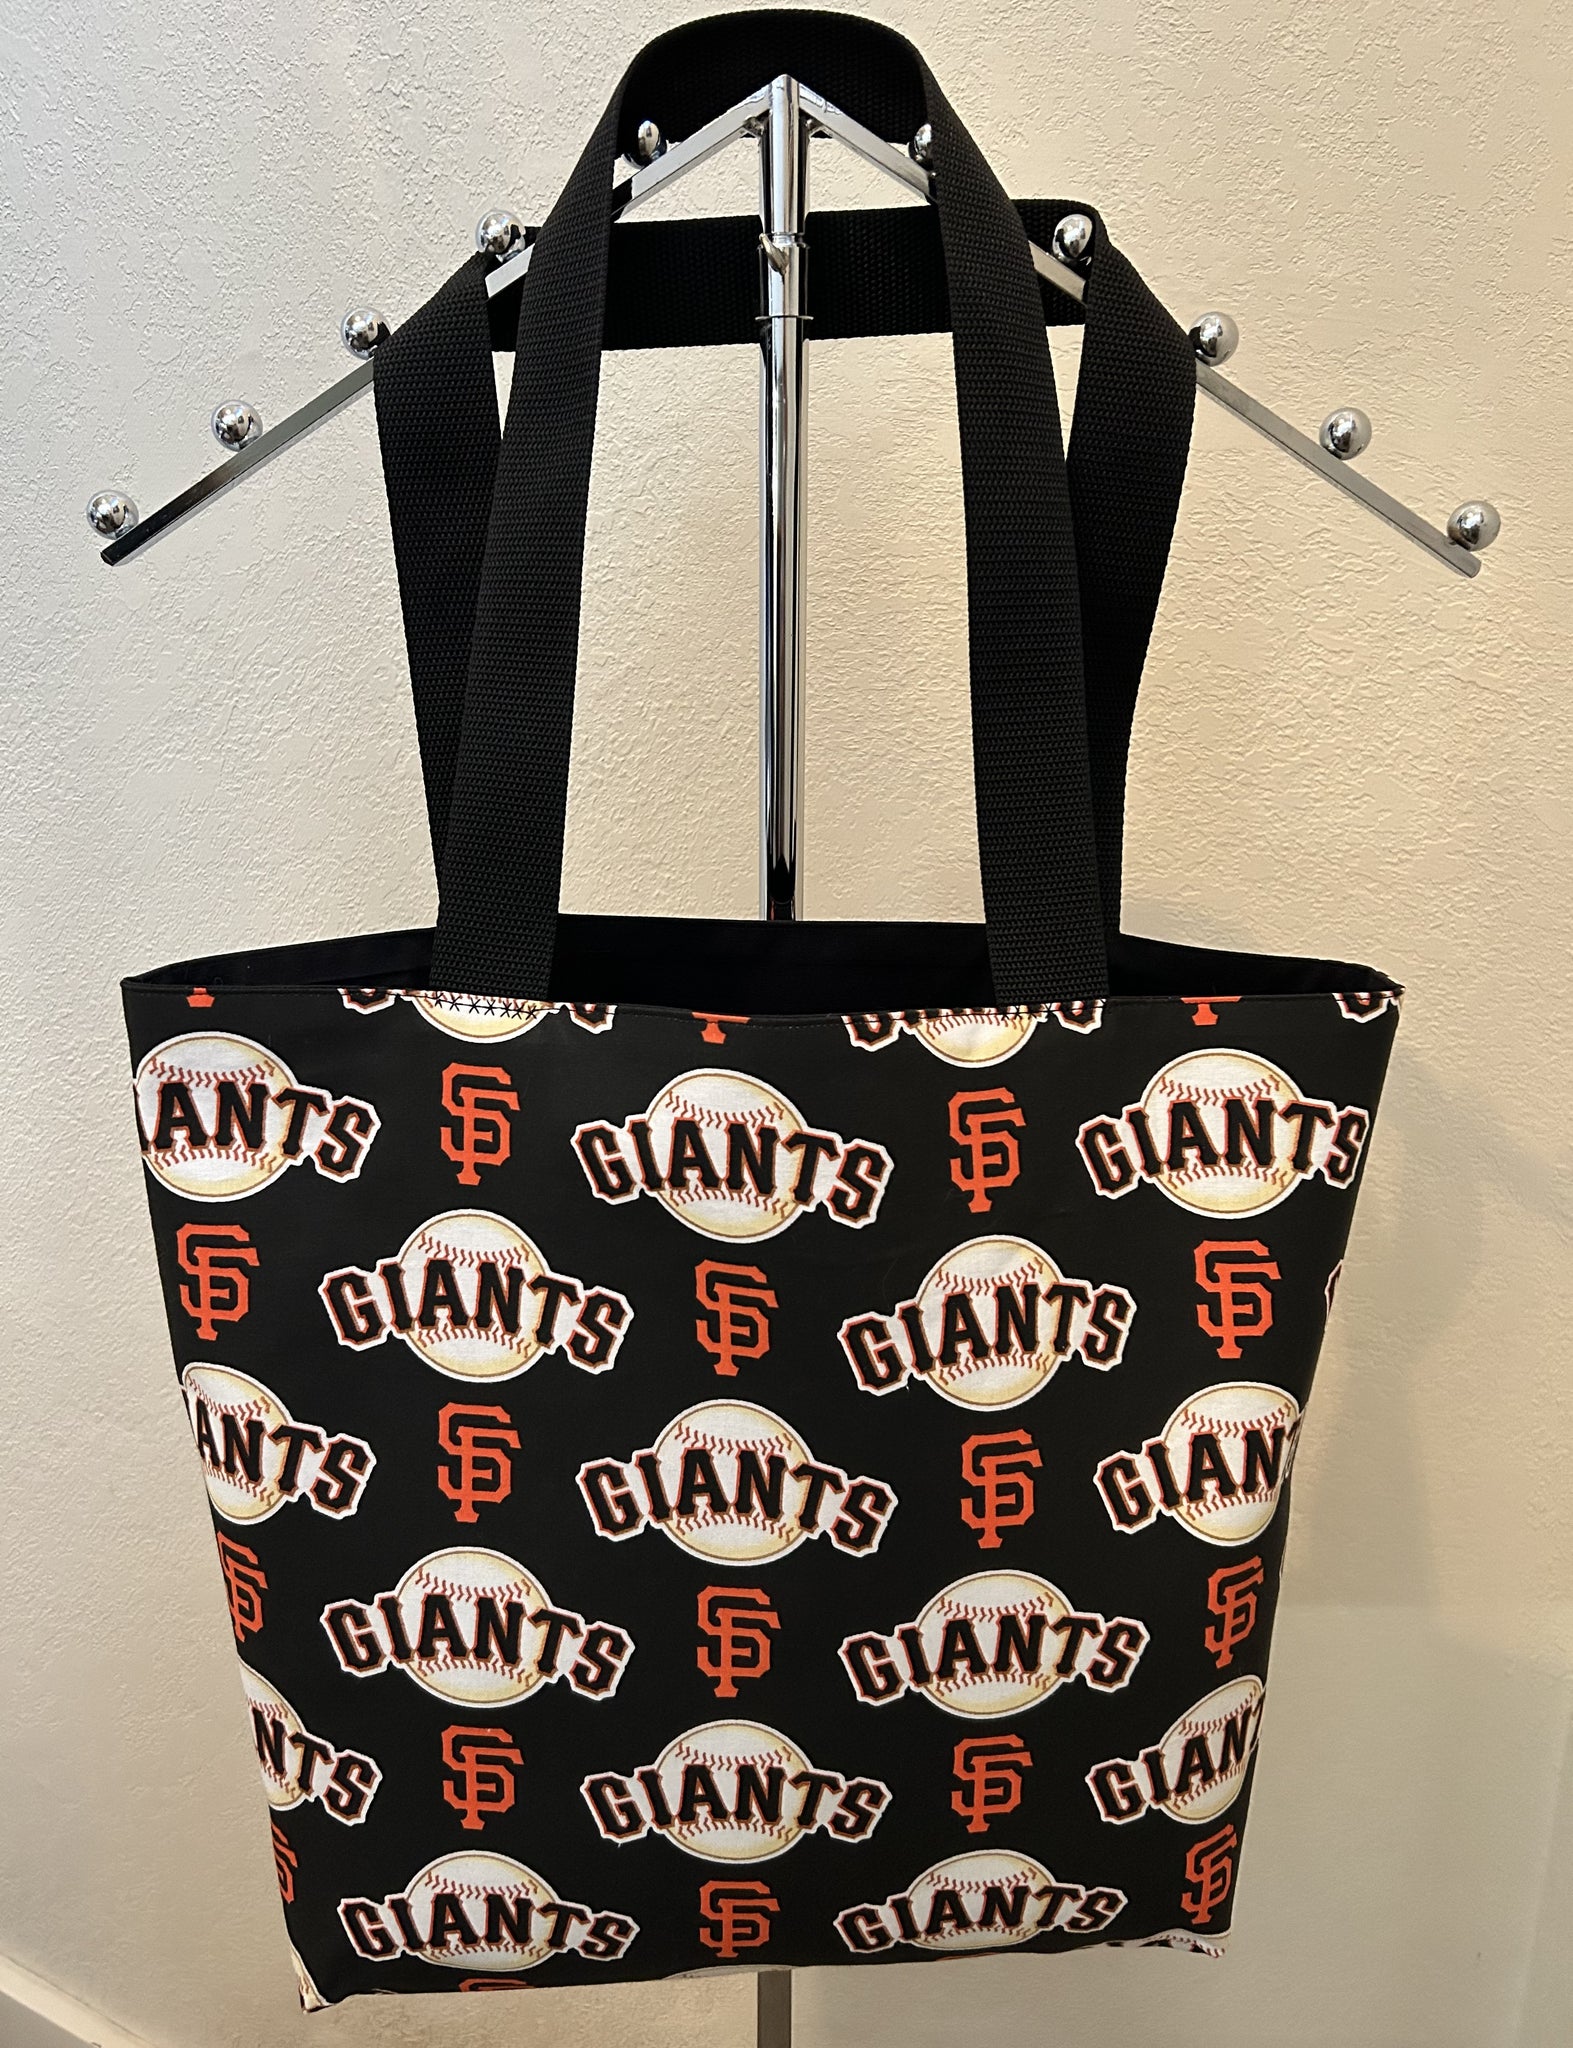 San Francisco Giants Baseball – Totes By Clydesdale